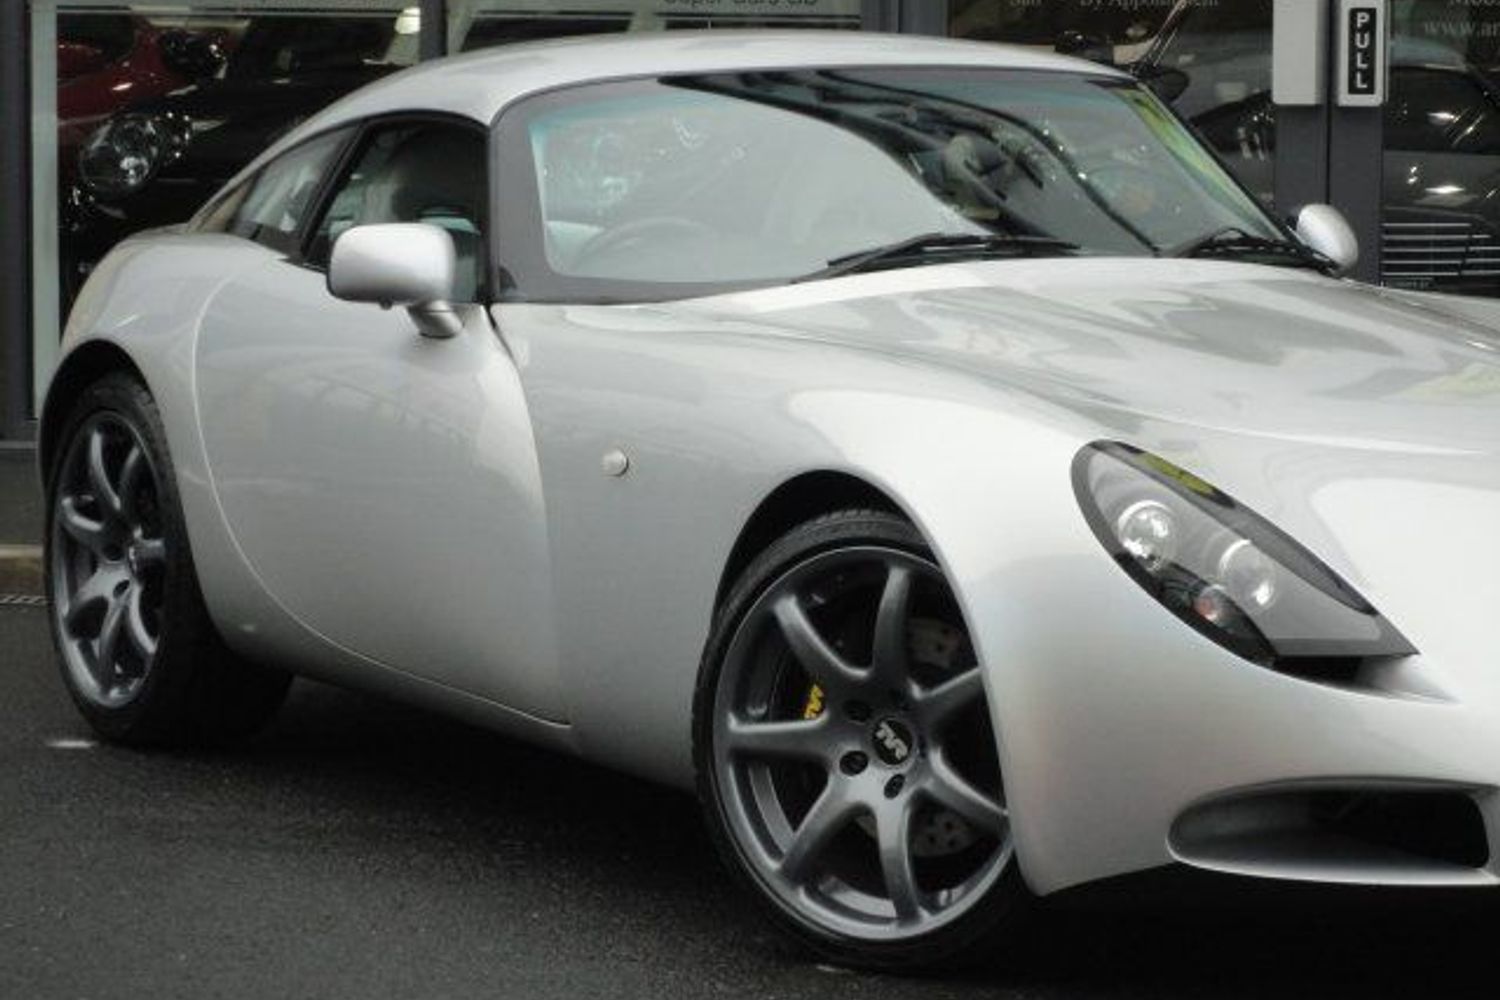 TVR T350 3.6 "one of the very last cars"